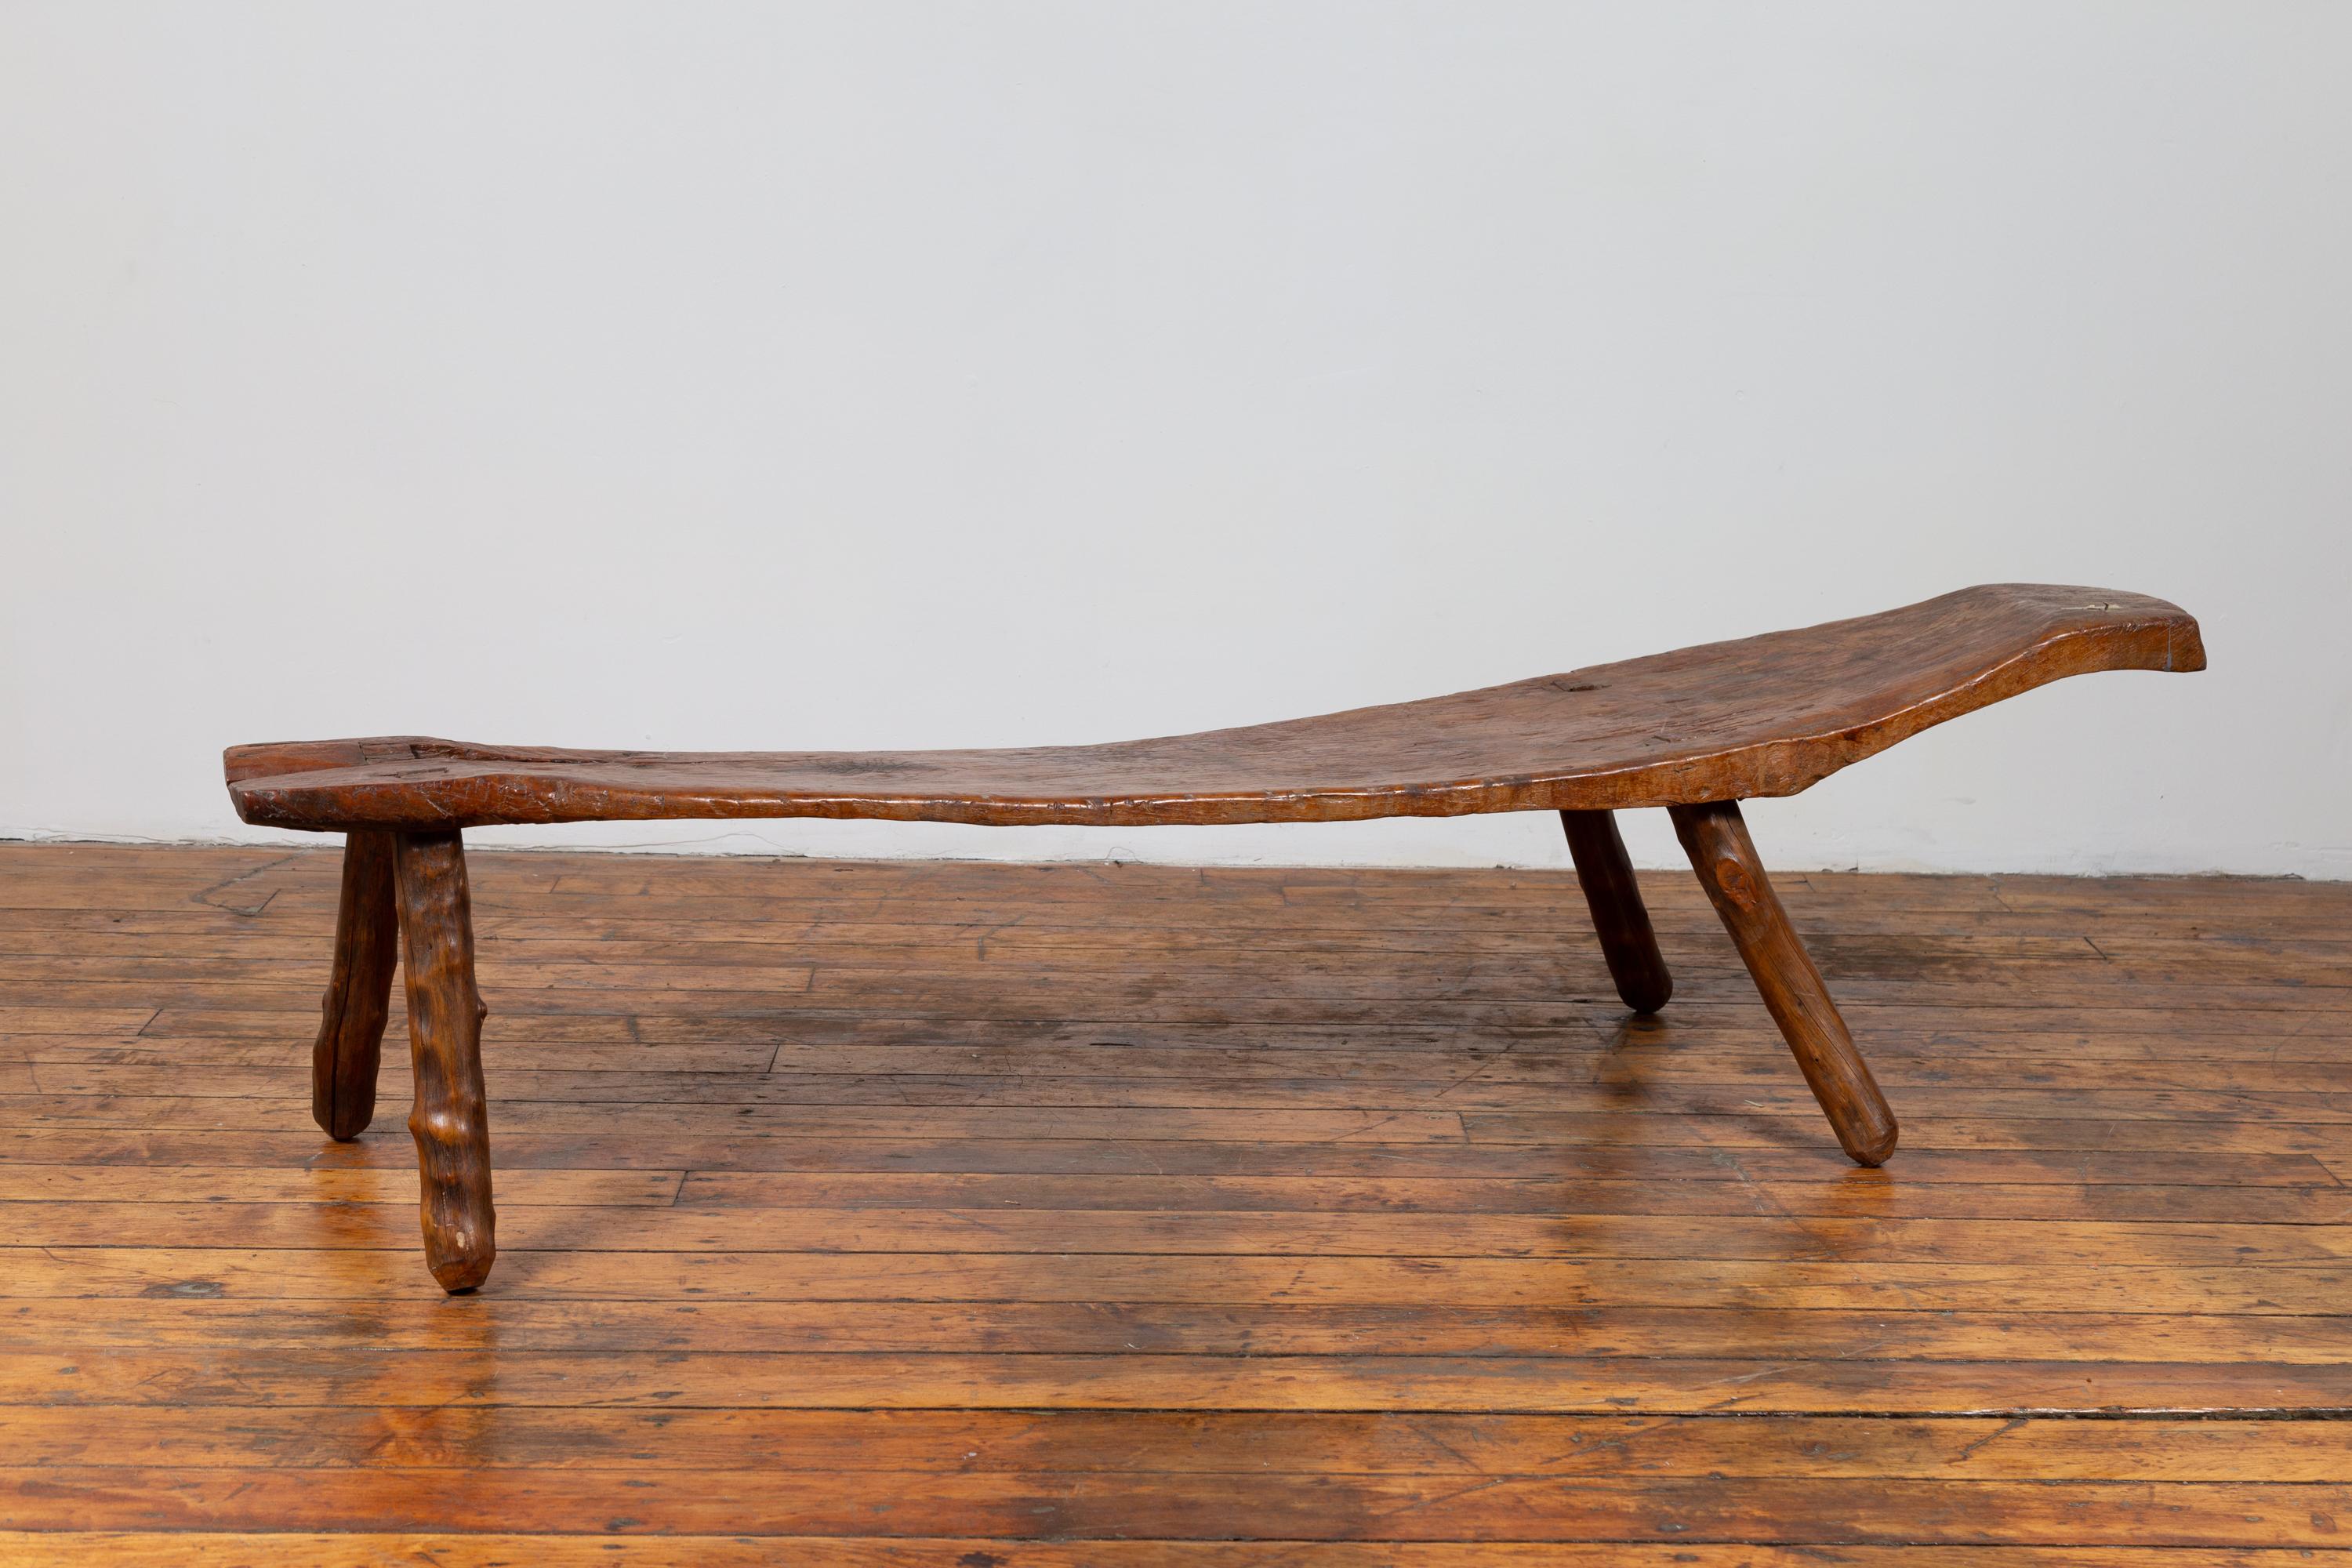 Rustic 19th Century Freeform Javanese Wooden Bench with Weathered Patina 3